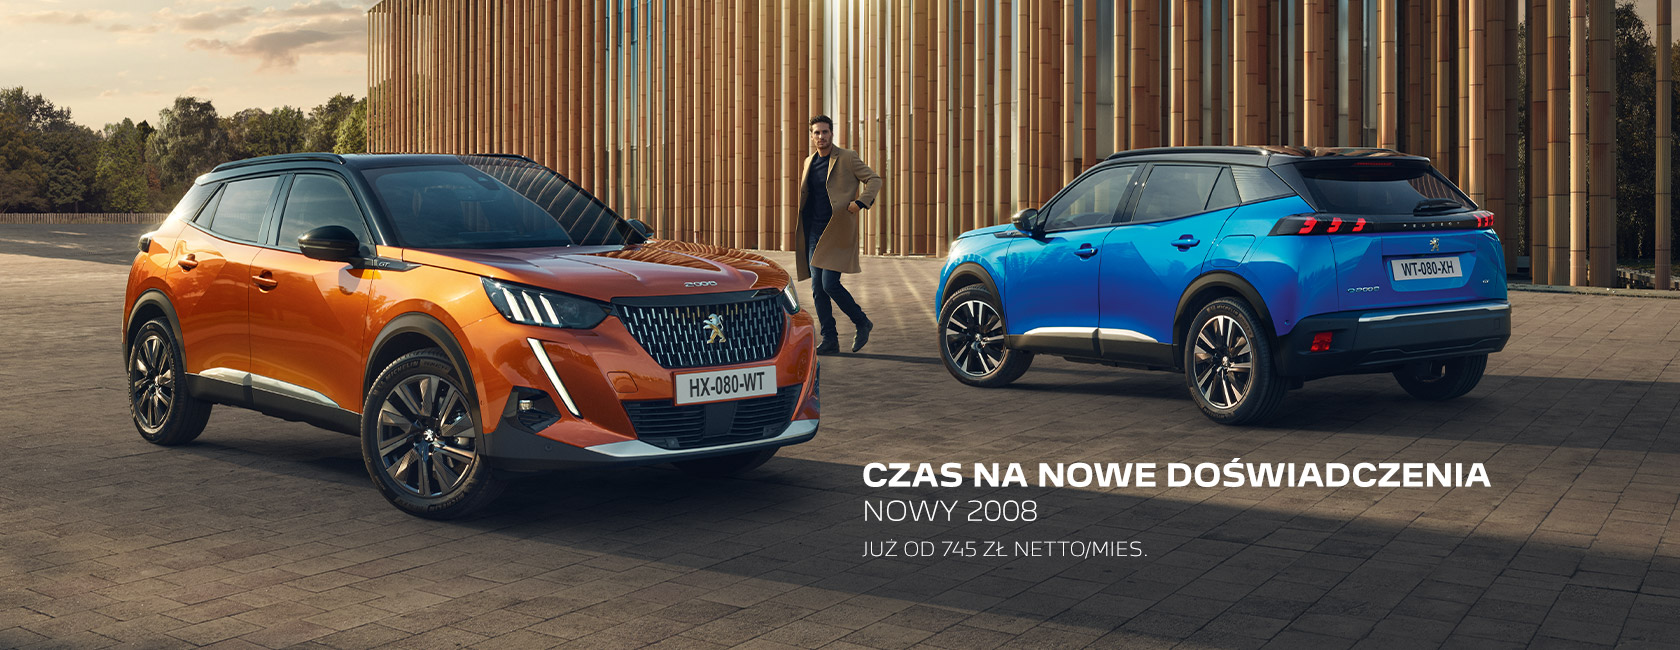 Nowy SUV Peugeot 2008 